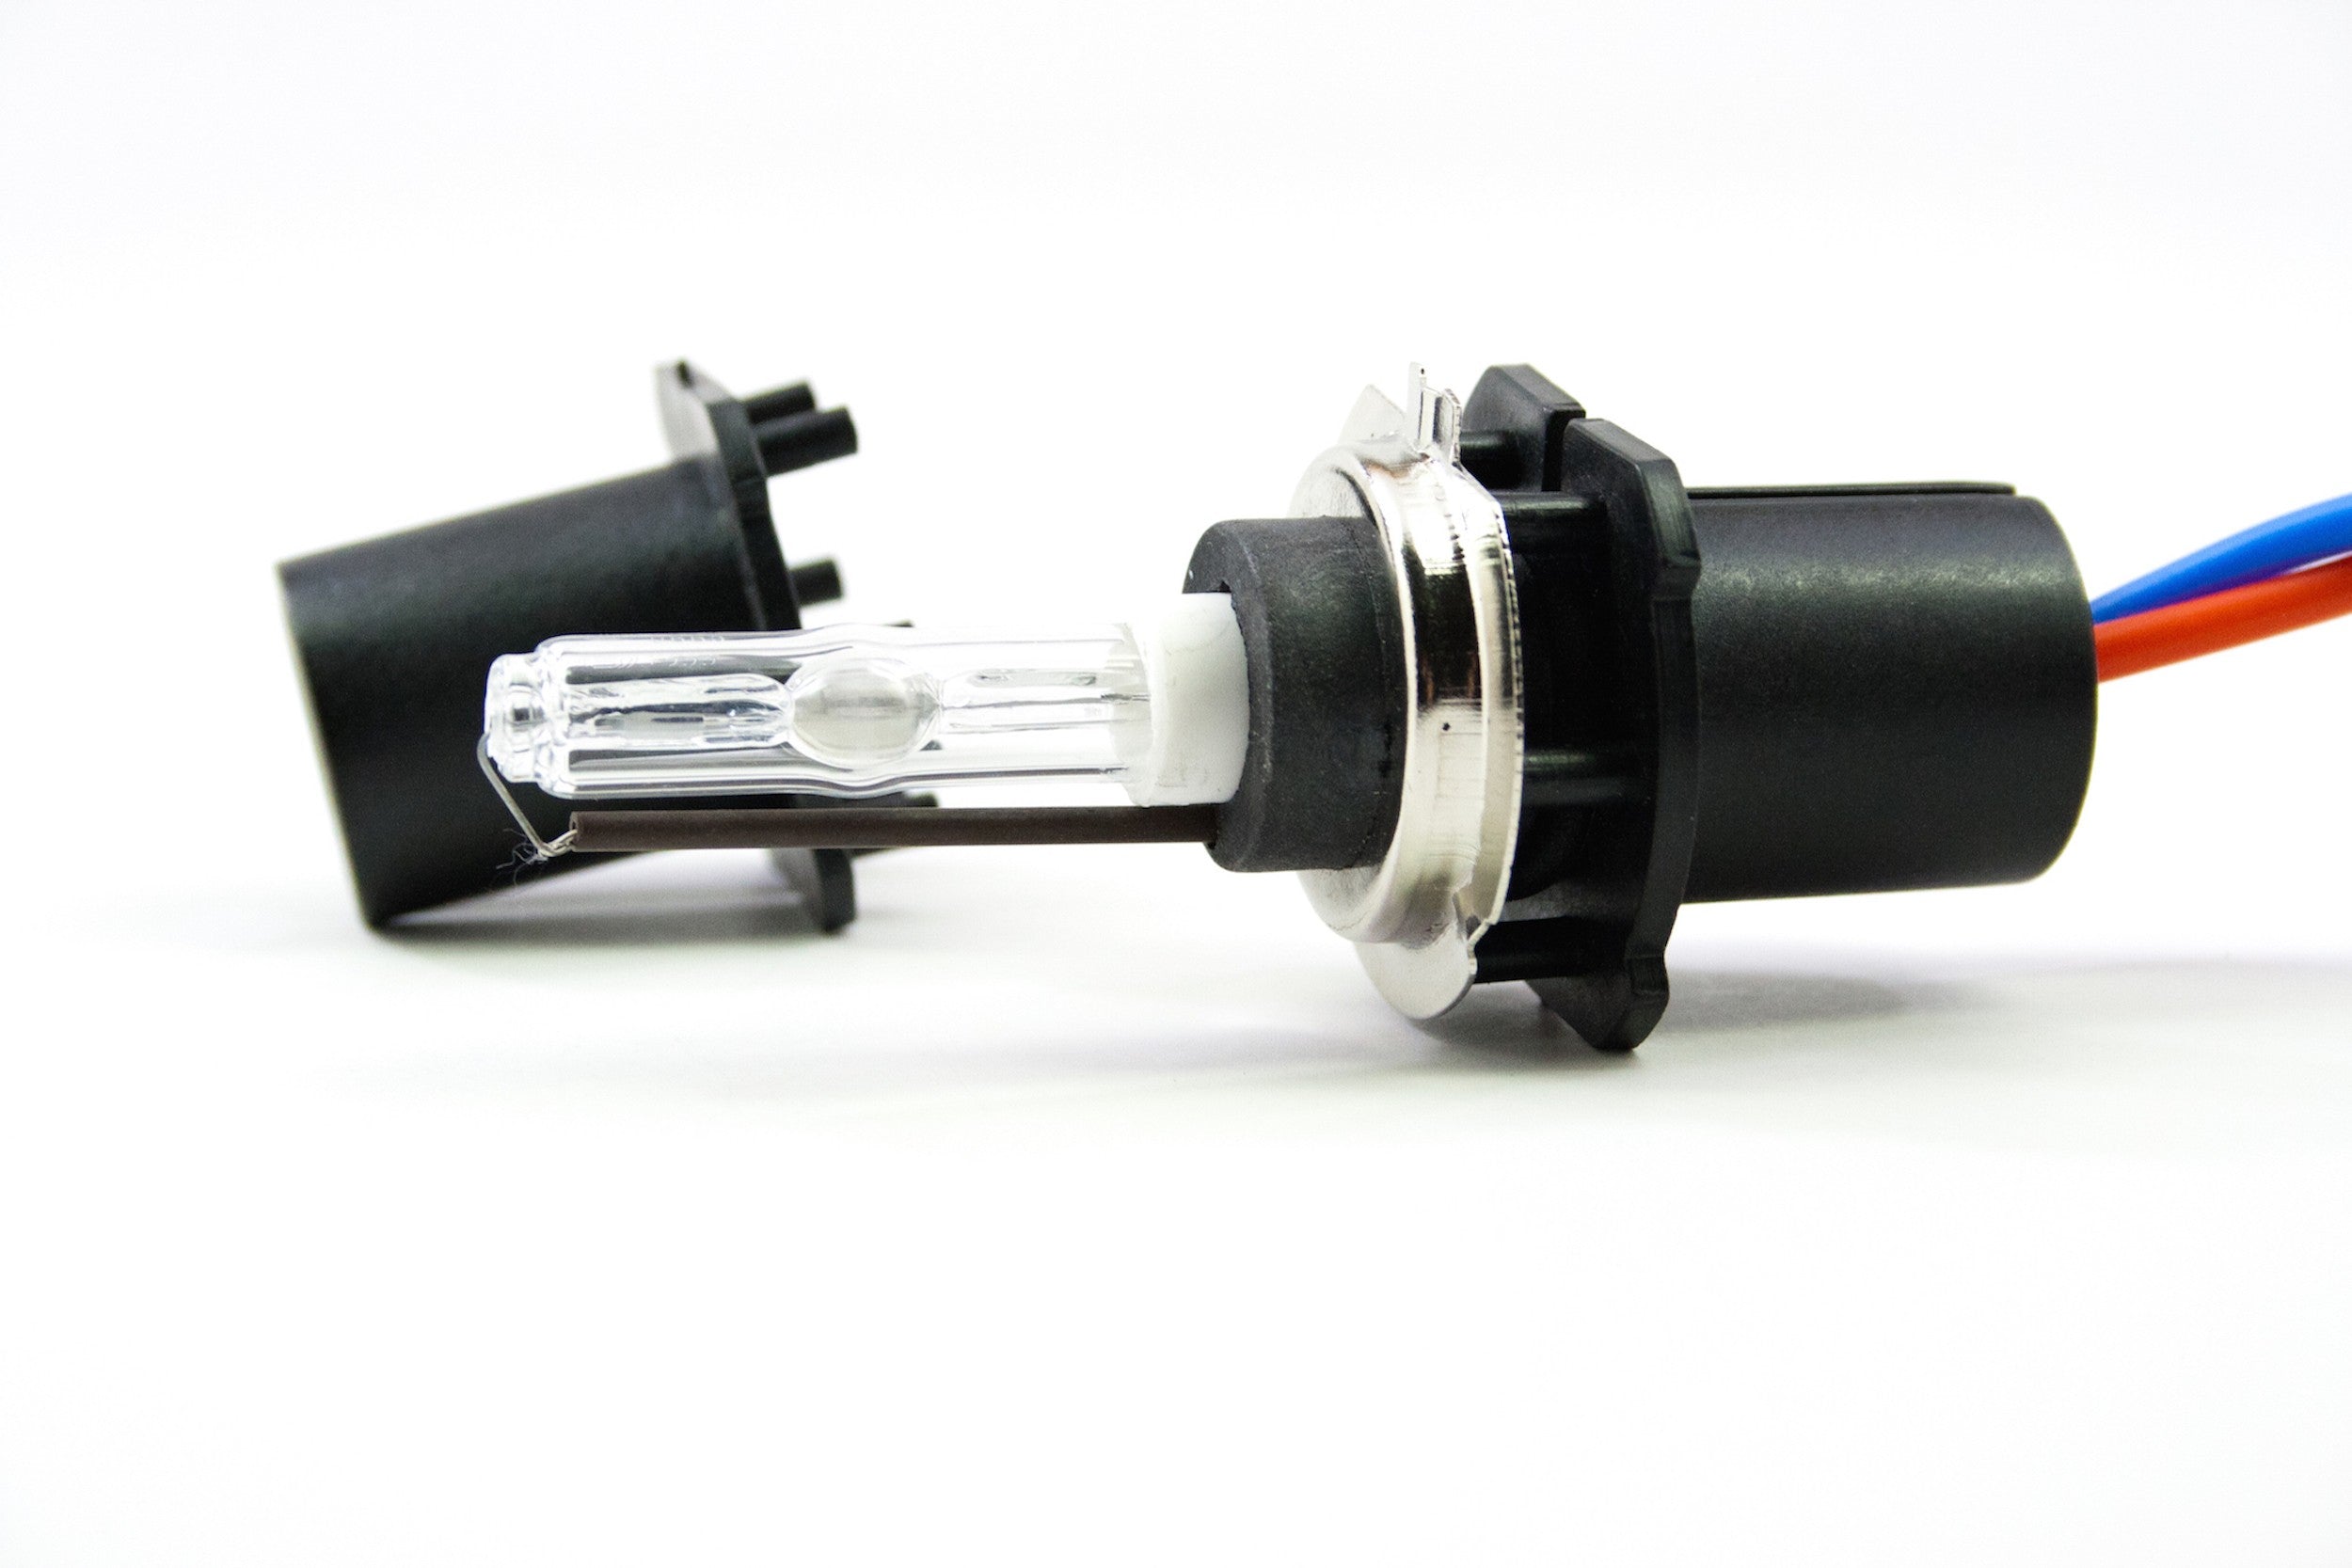 What an HID bulb adapter is, H1 bulb holder